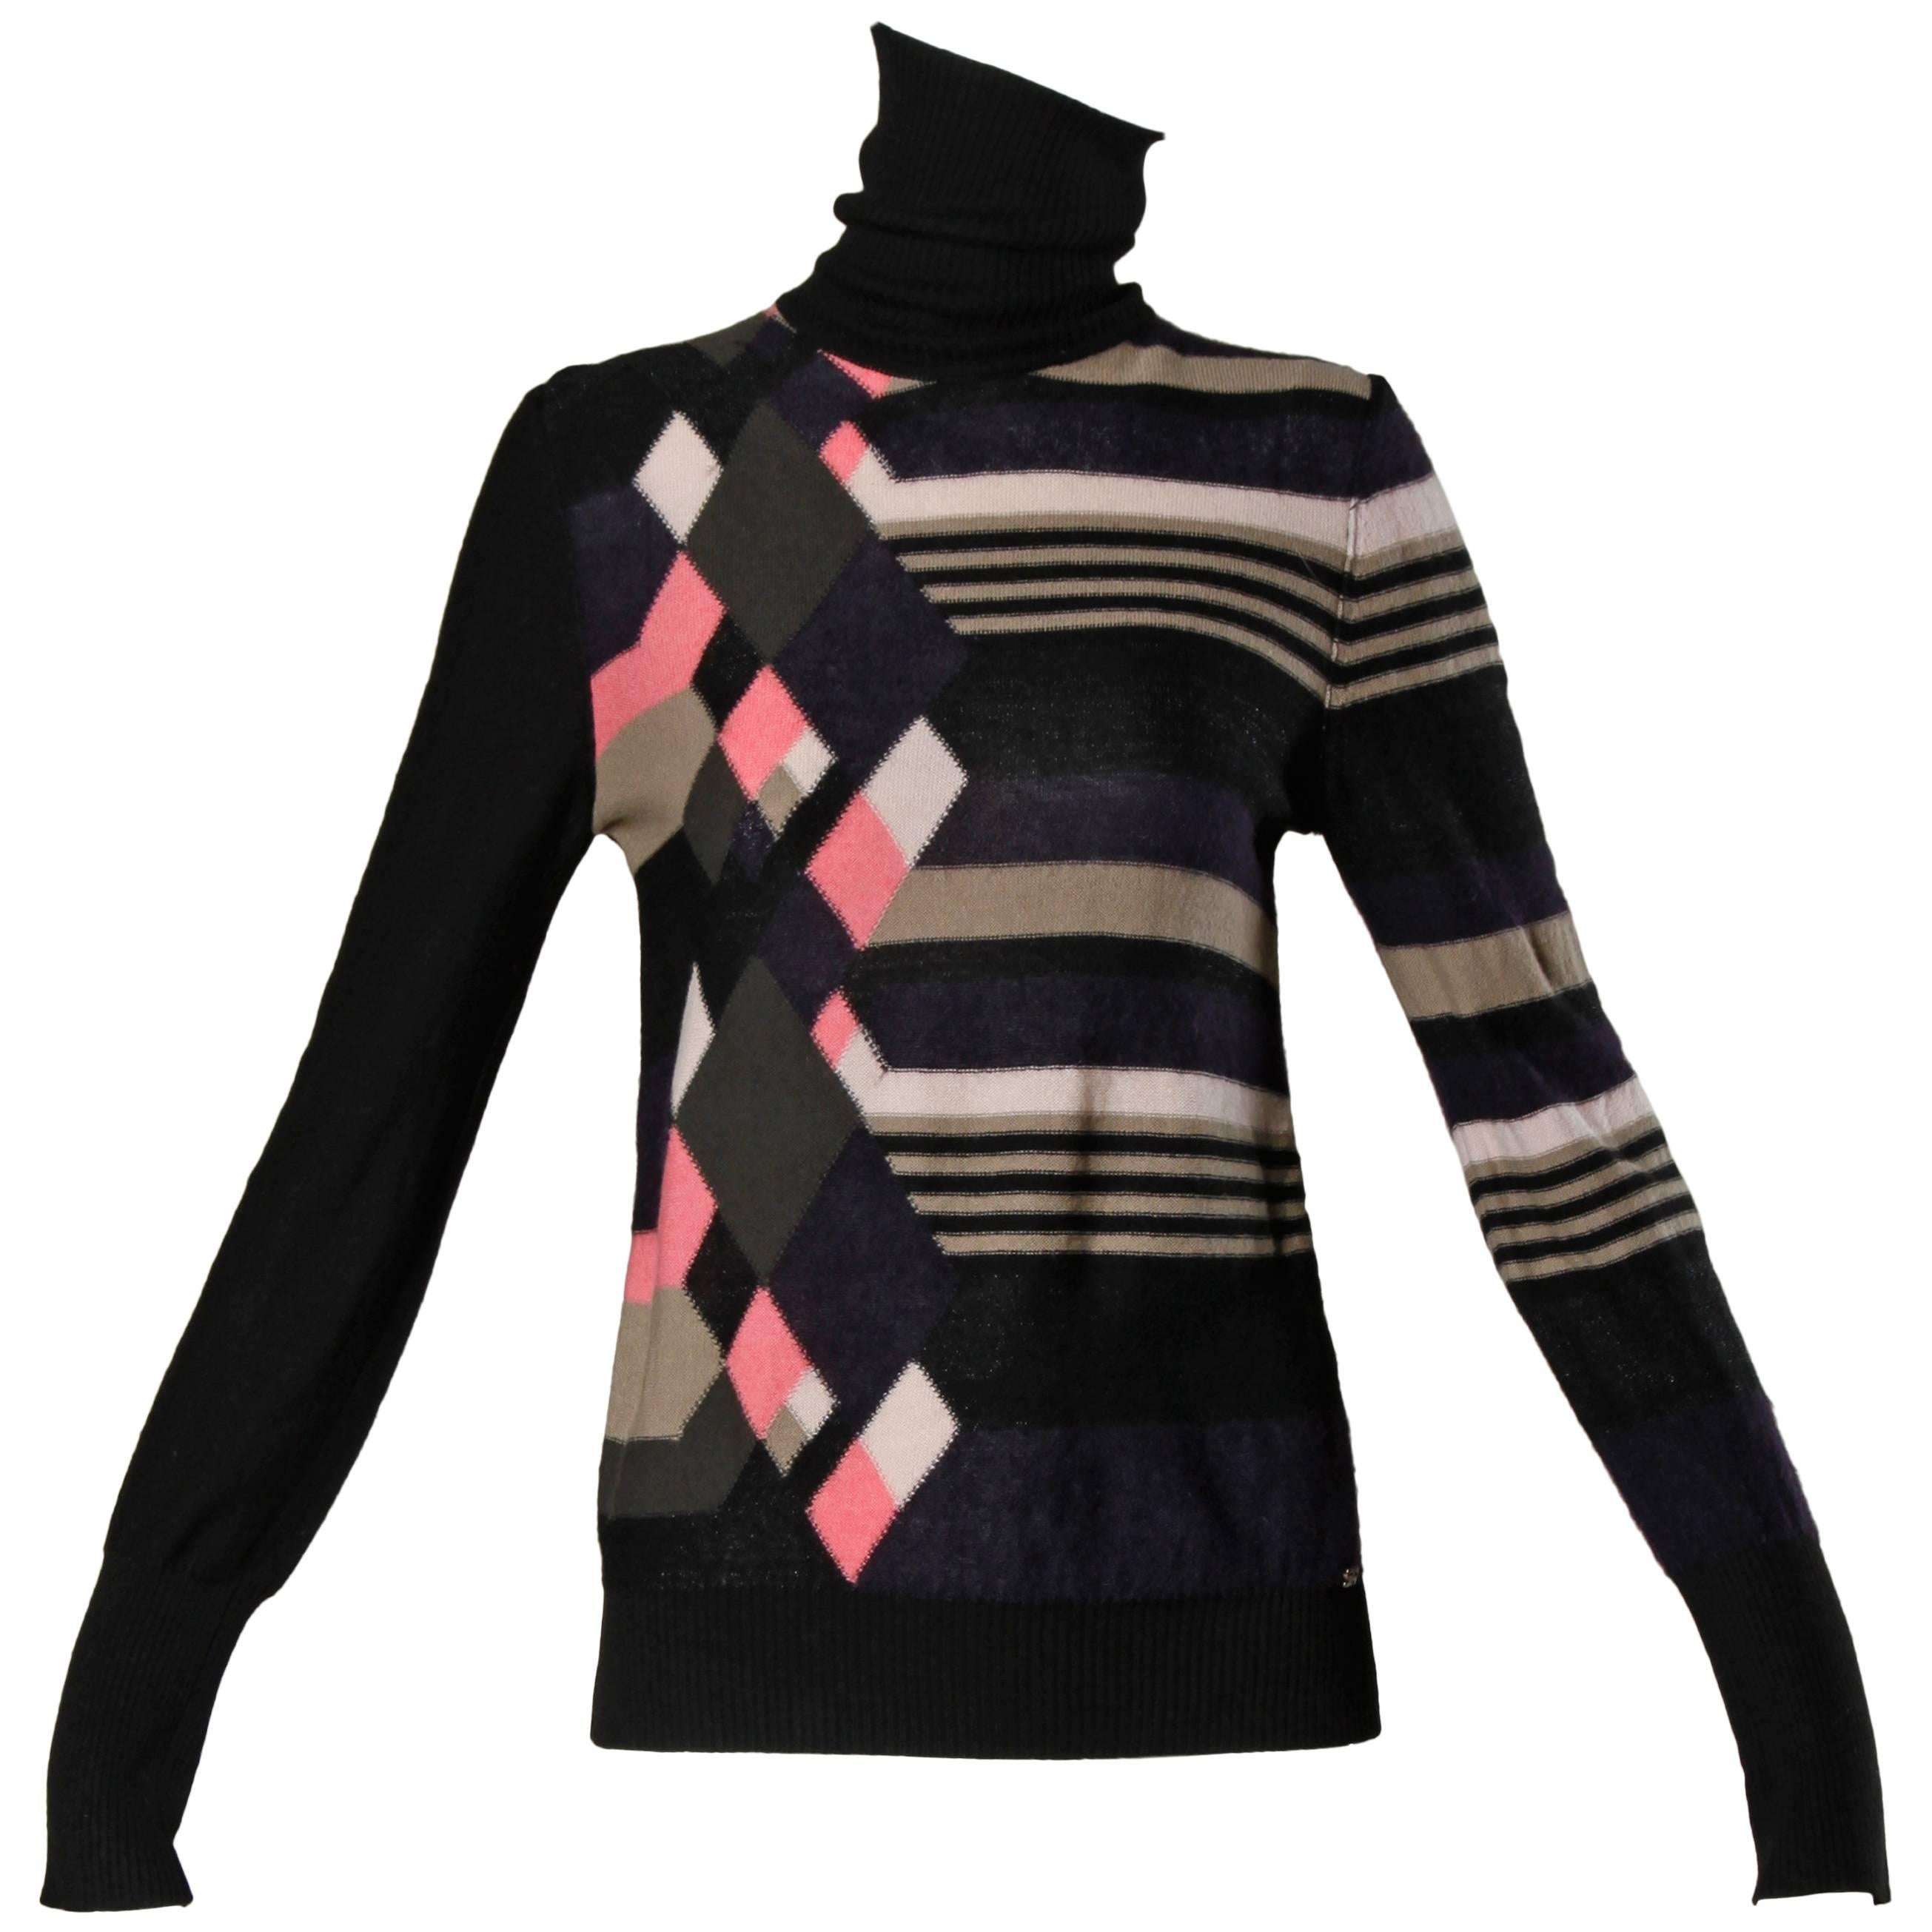 Sonia Rykiel Wool Cashmere Blend Knit Turtle Neck Sweater with Geometric Design